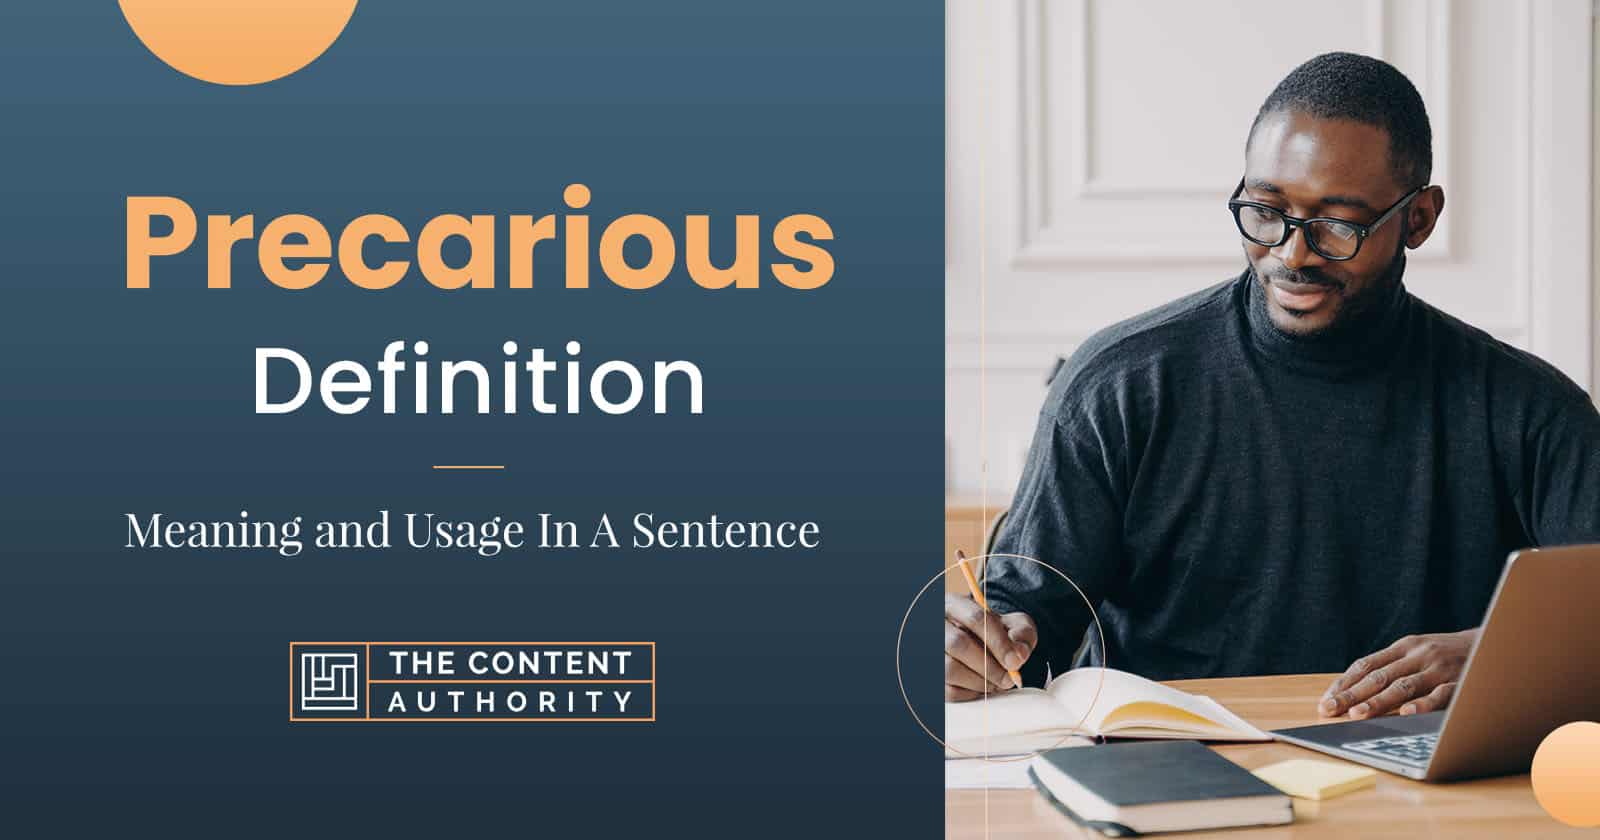 Precarious Definition &#8211; Meaning and Usage In A Sentence